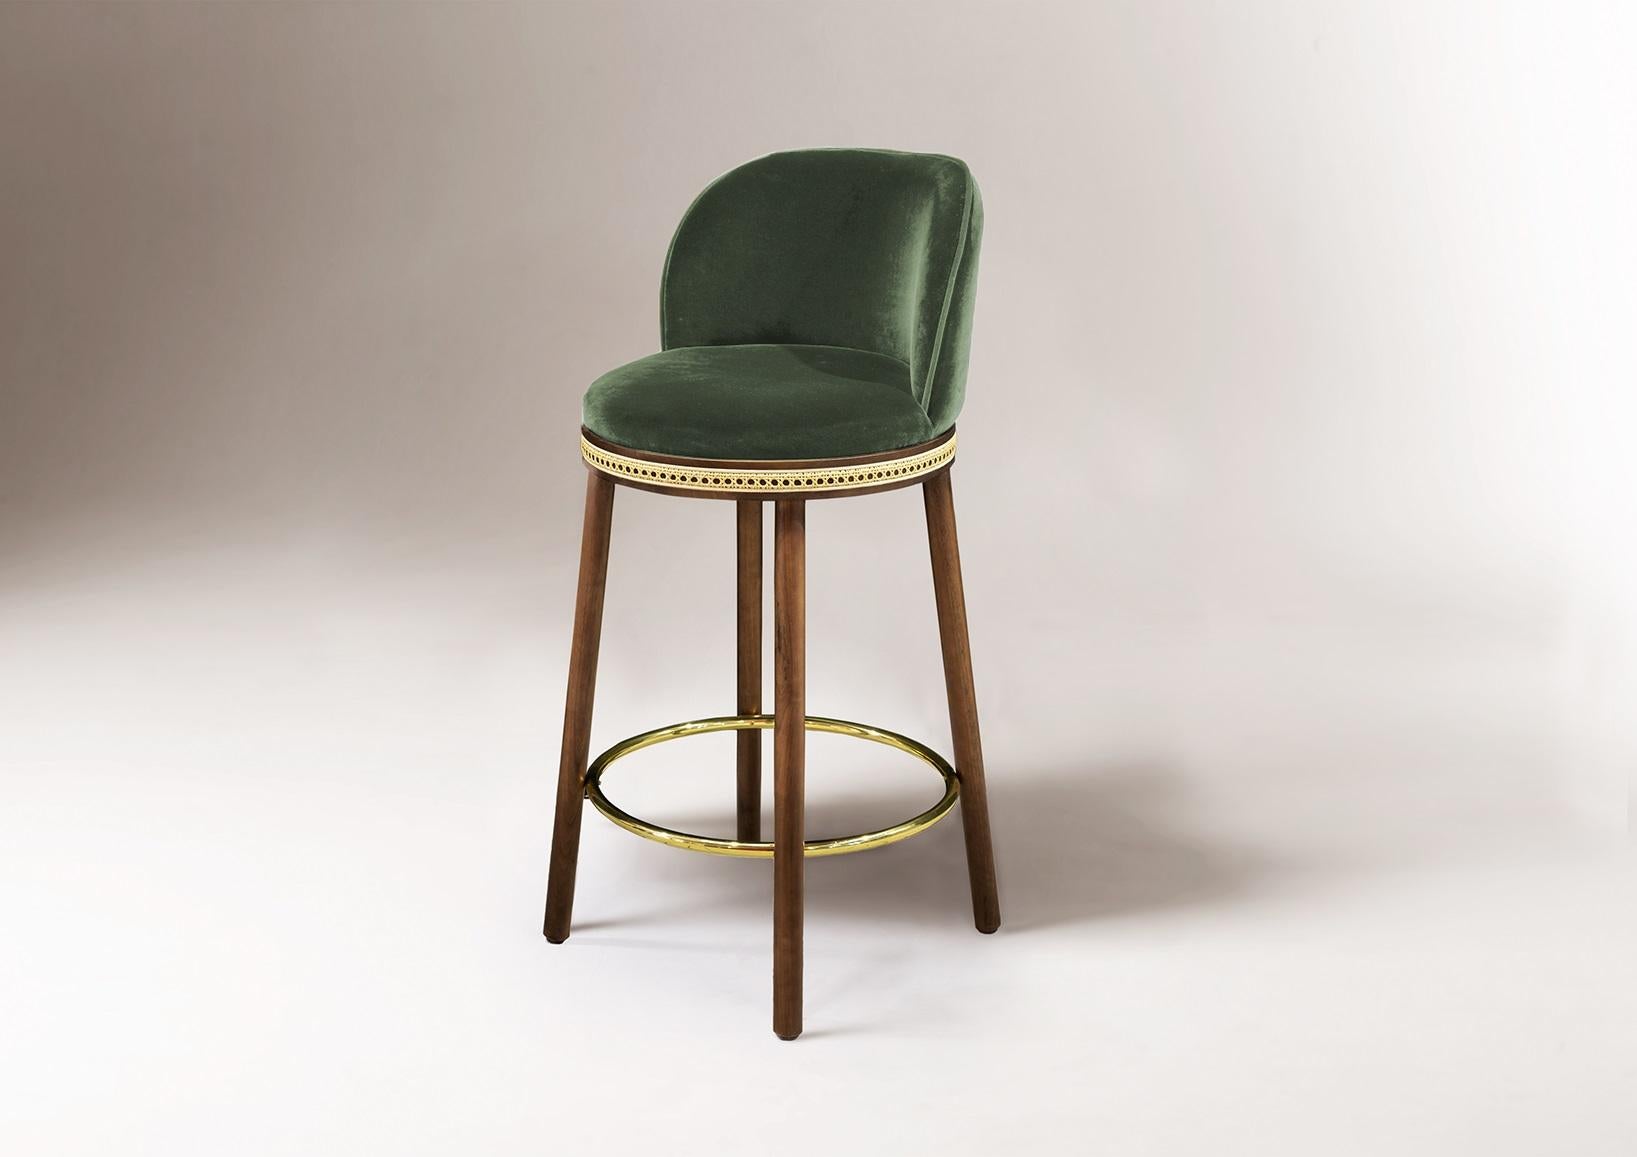 DOOQ Mid-Century Modern Bar Chair Alma with Green Velvet, Walnut and Brass

In a piece that combines classic and modern aesthetics we can find a certain harmonic gracefulness paired with an intimate voluptuousness that can embrace you and